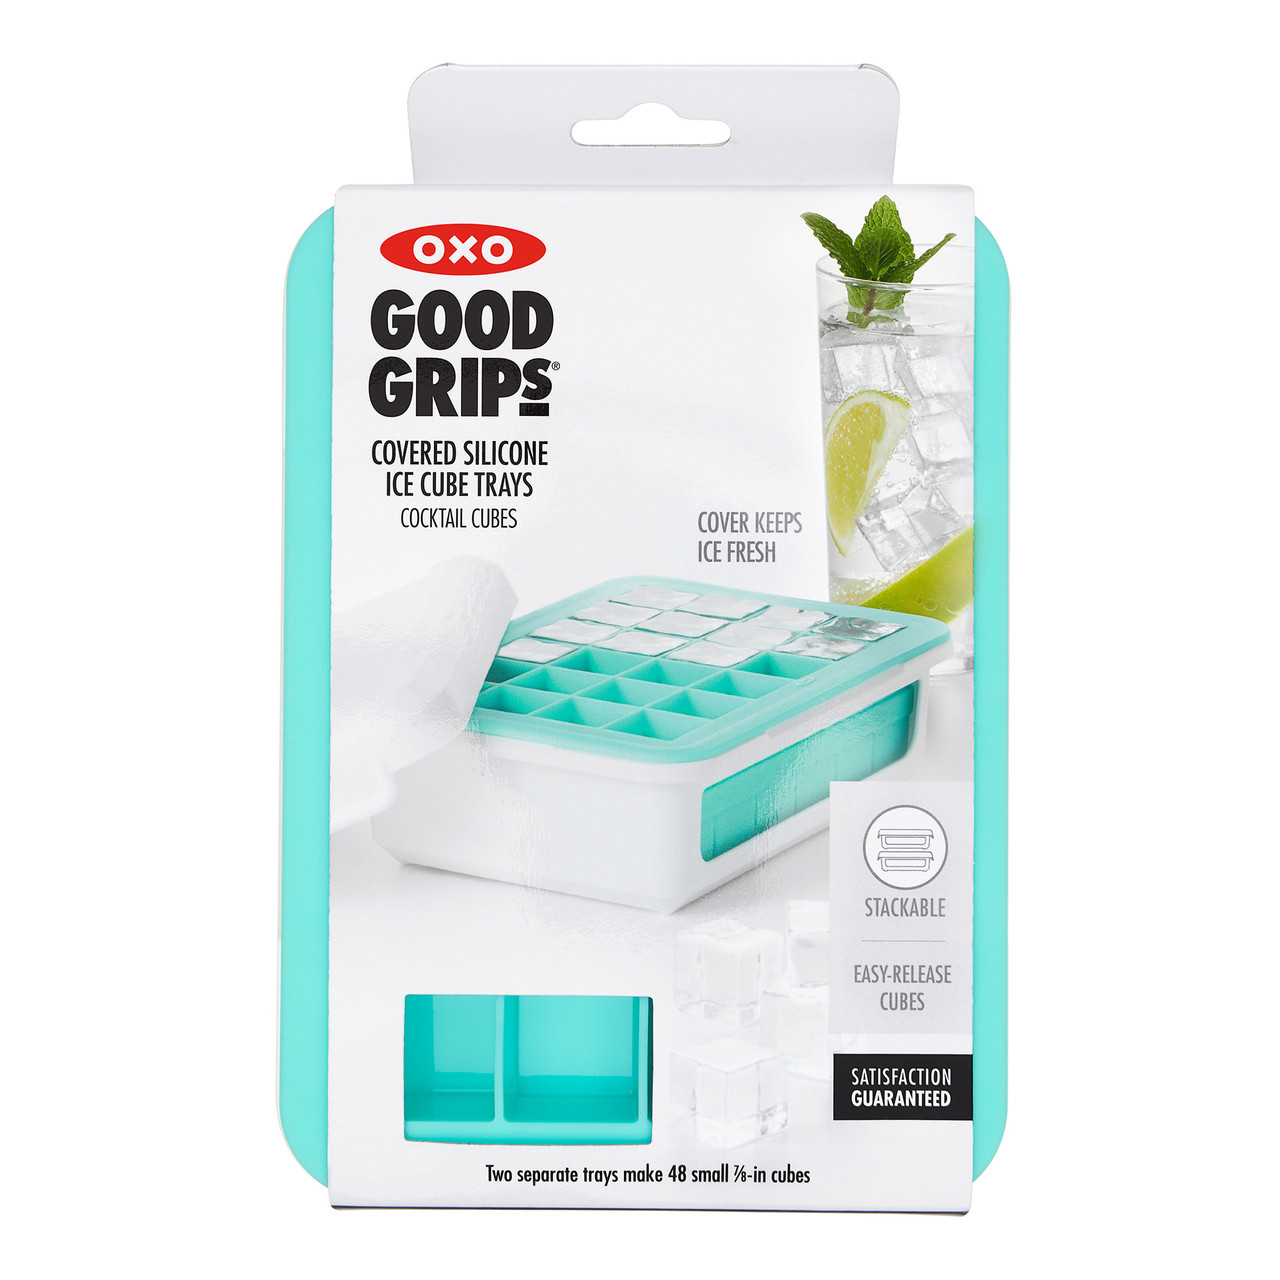 OXO Good Grips Covered Silicone Ice Cube Tray Large Cubes